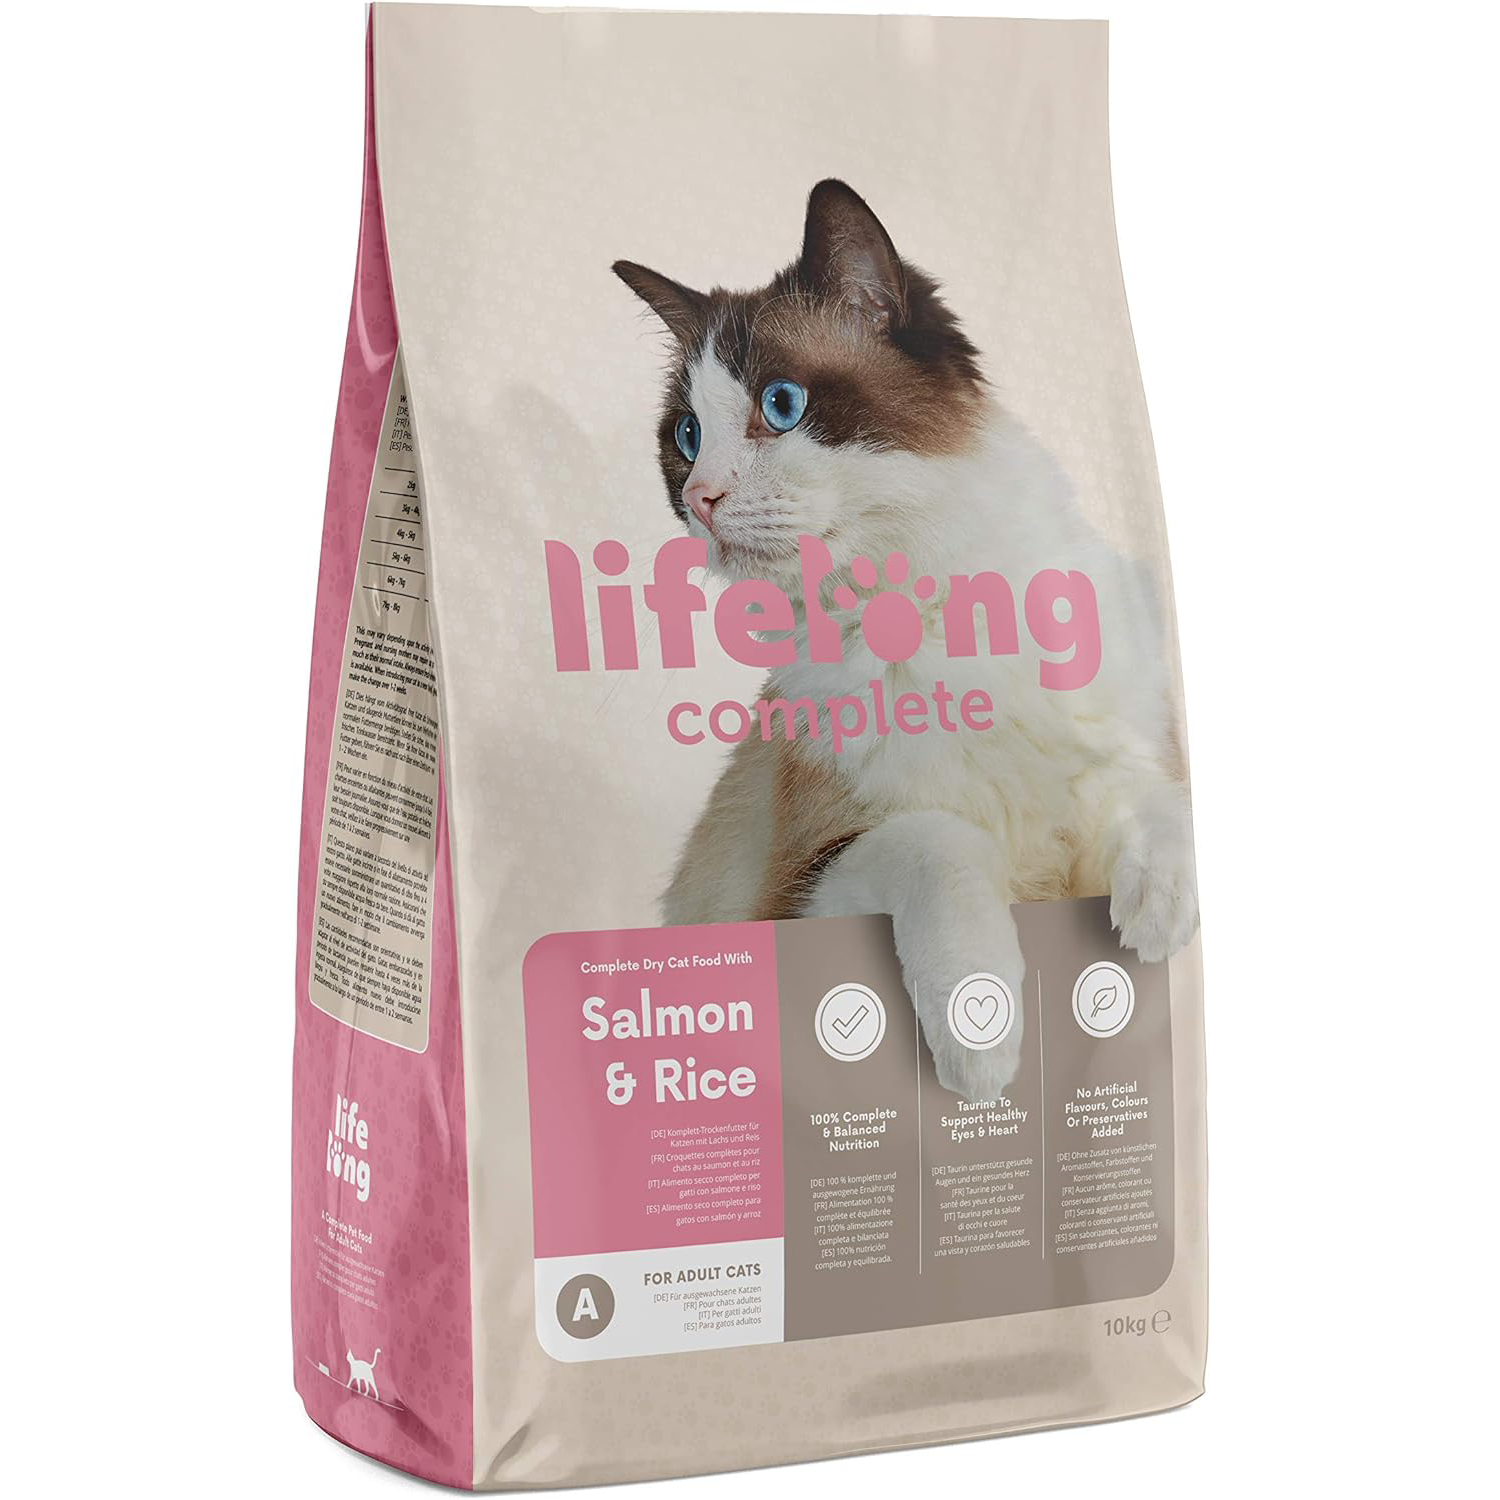 Amazon Brand - Lifelong - Complete Dry Cat Food with Salmon & Rice for Adult Cats